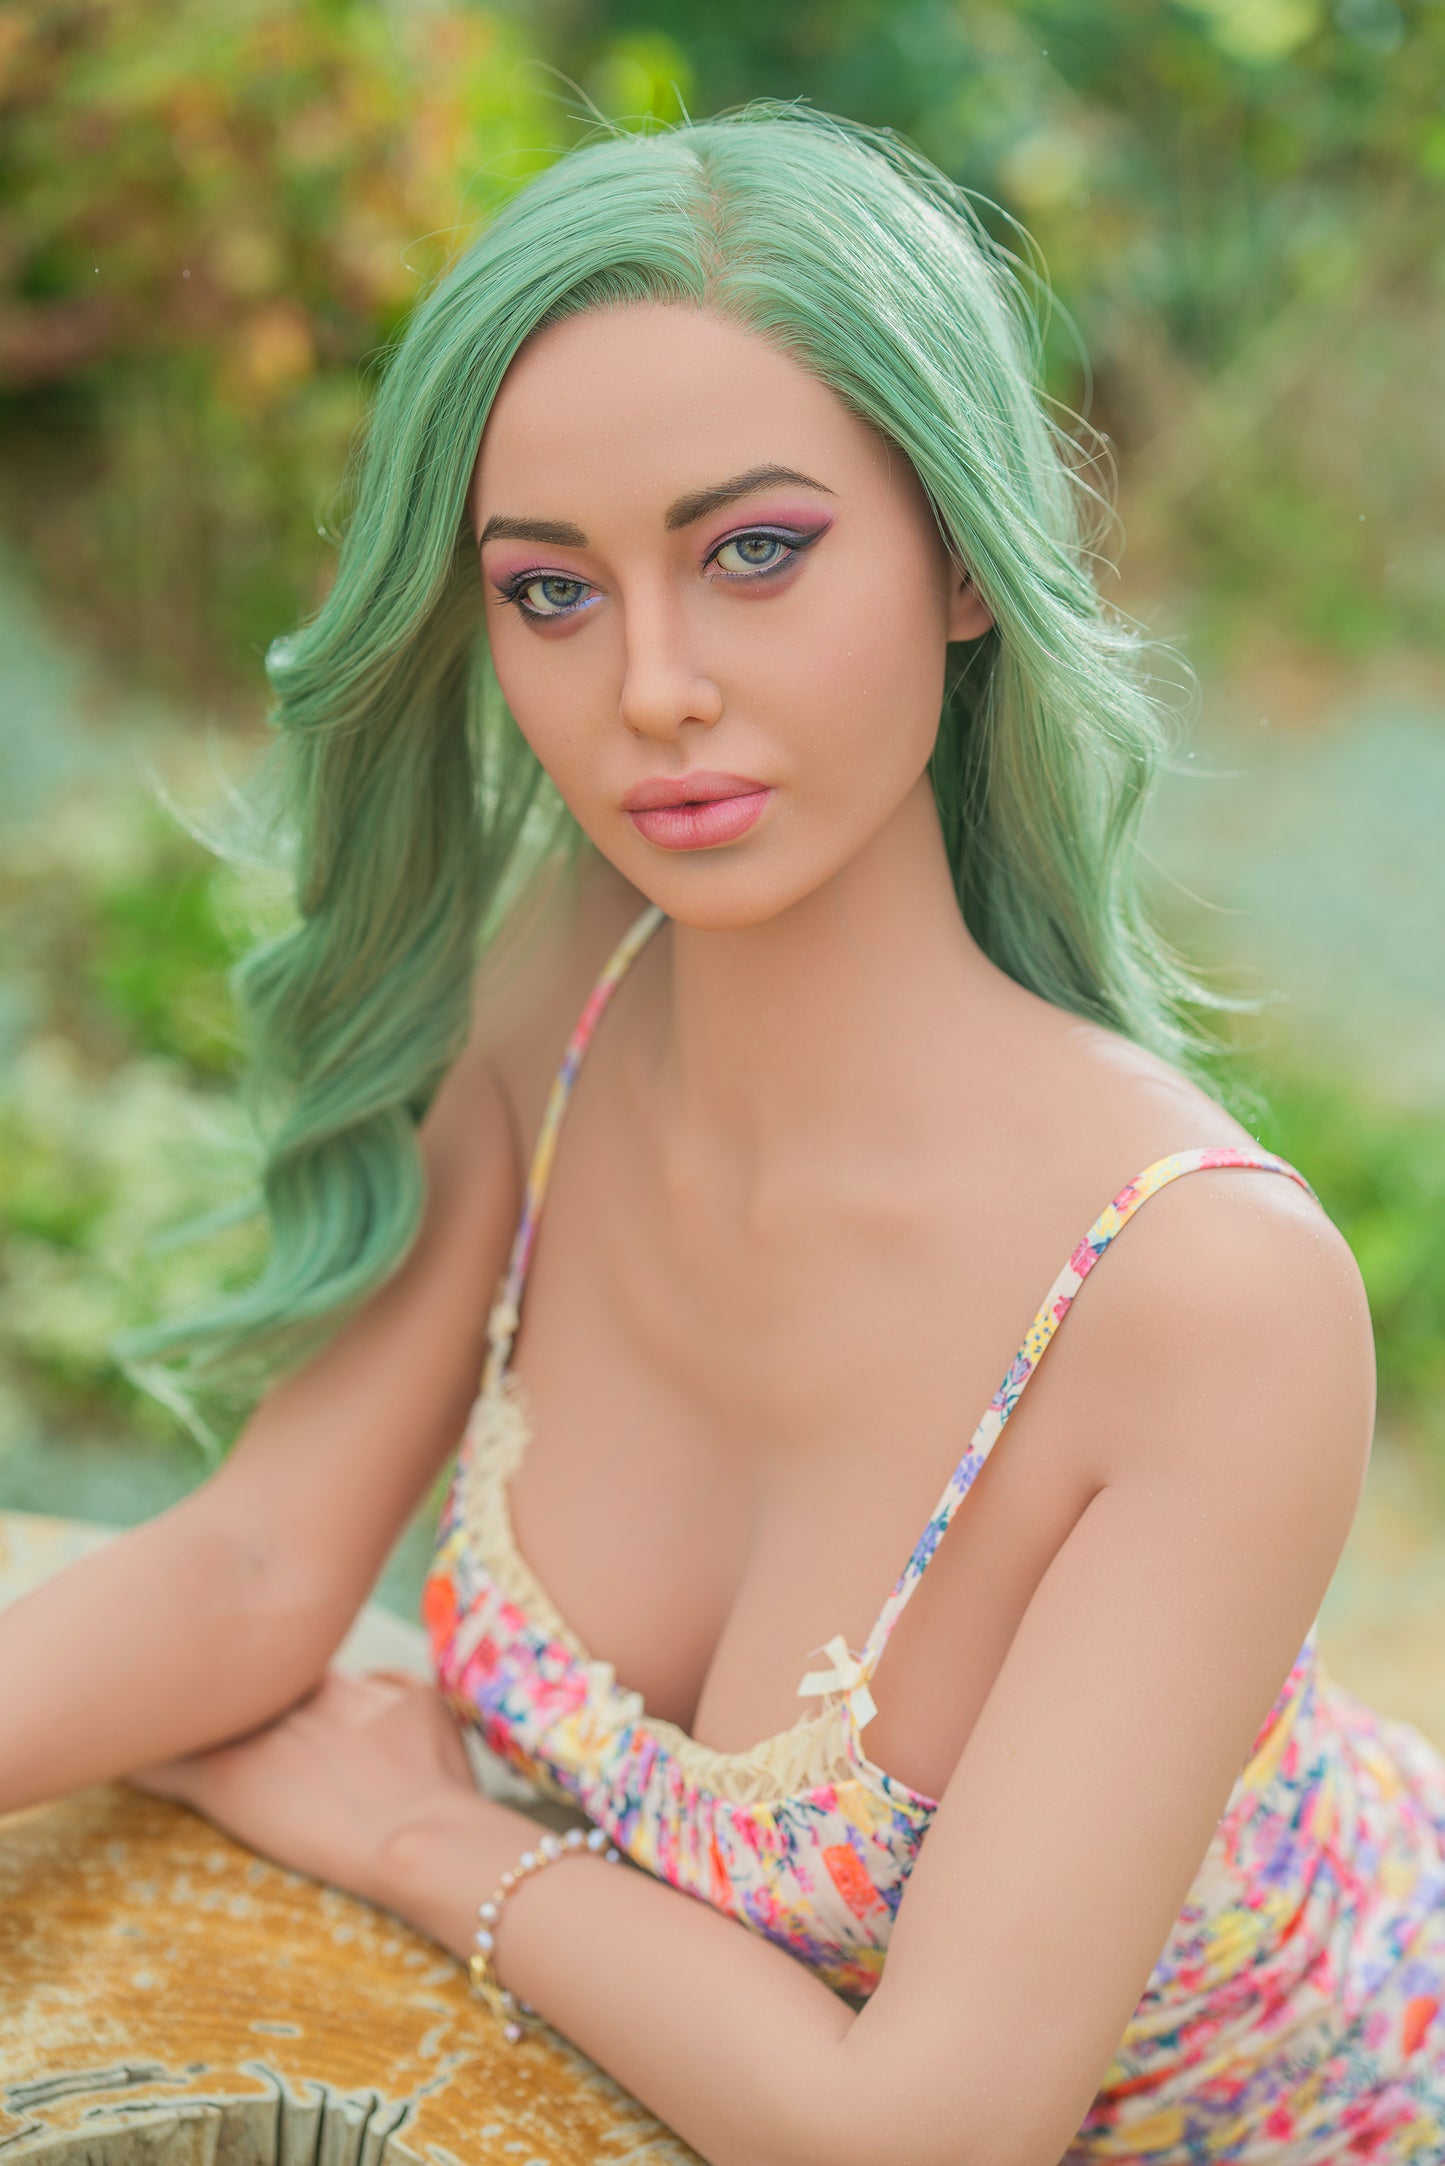 ZELEX Silicone Sex Doll Realistic Inspiration Series - Brooke 170cm